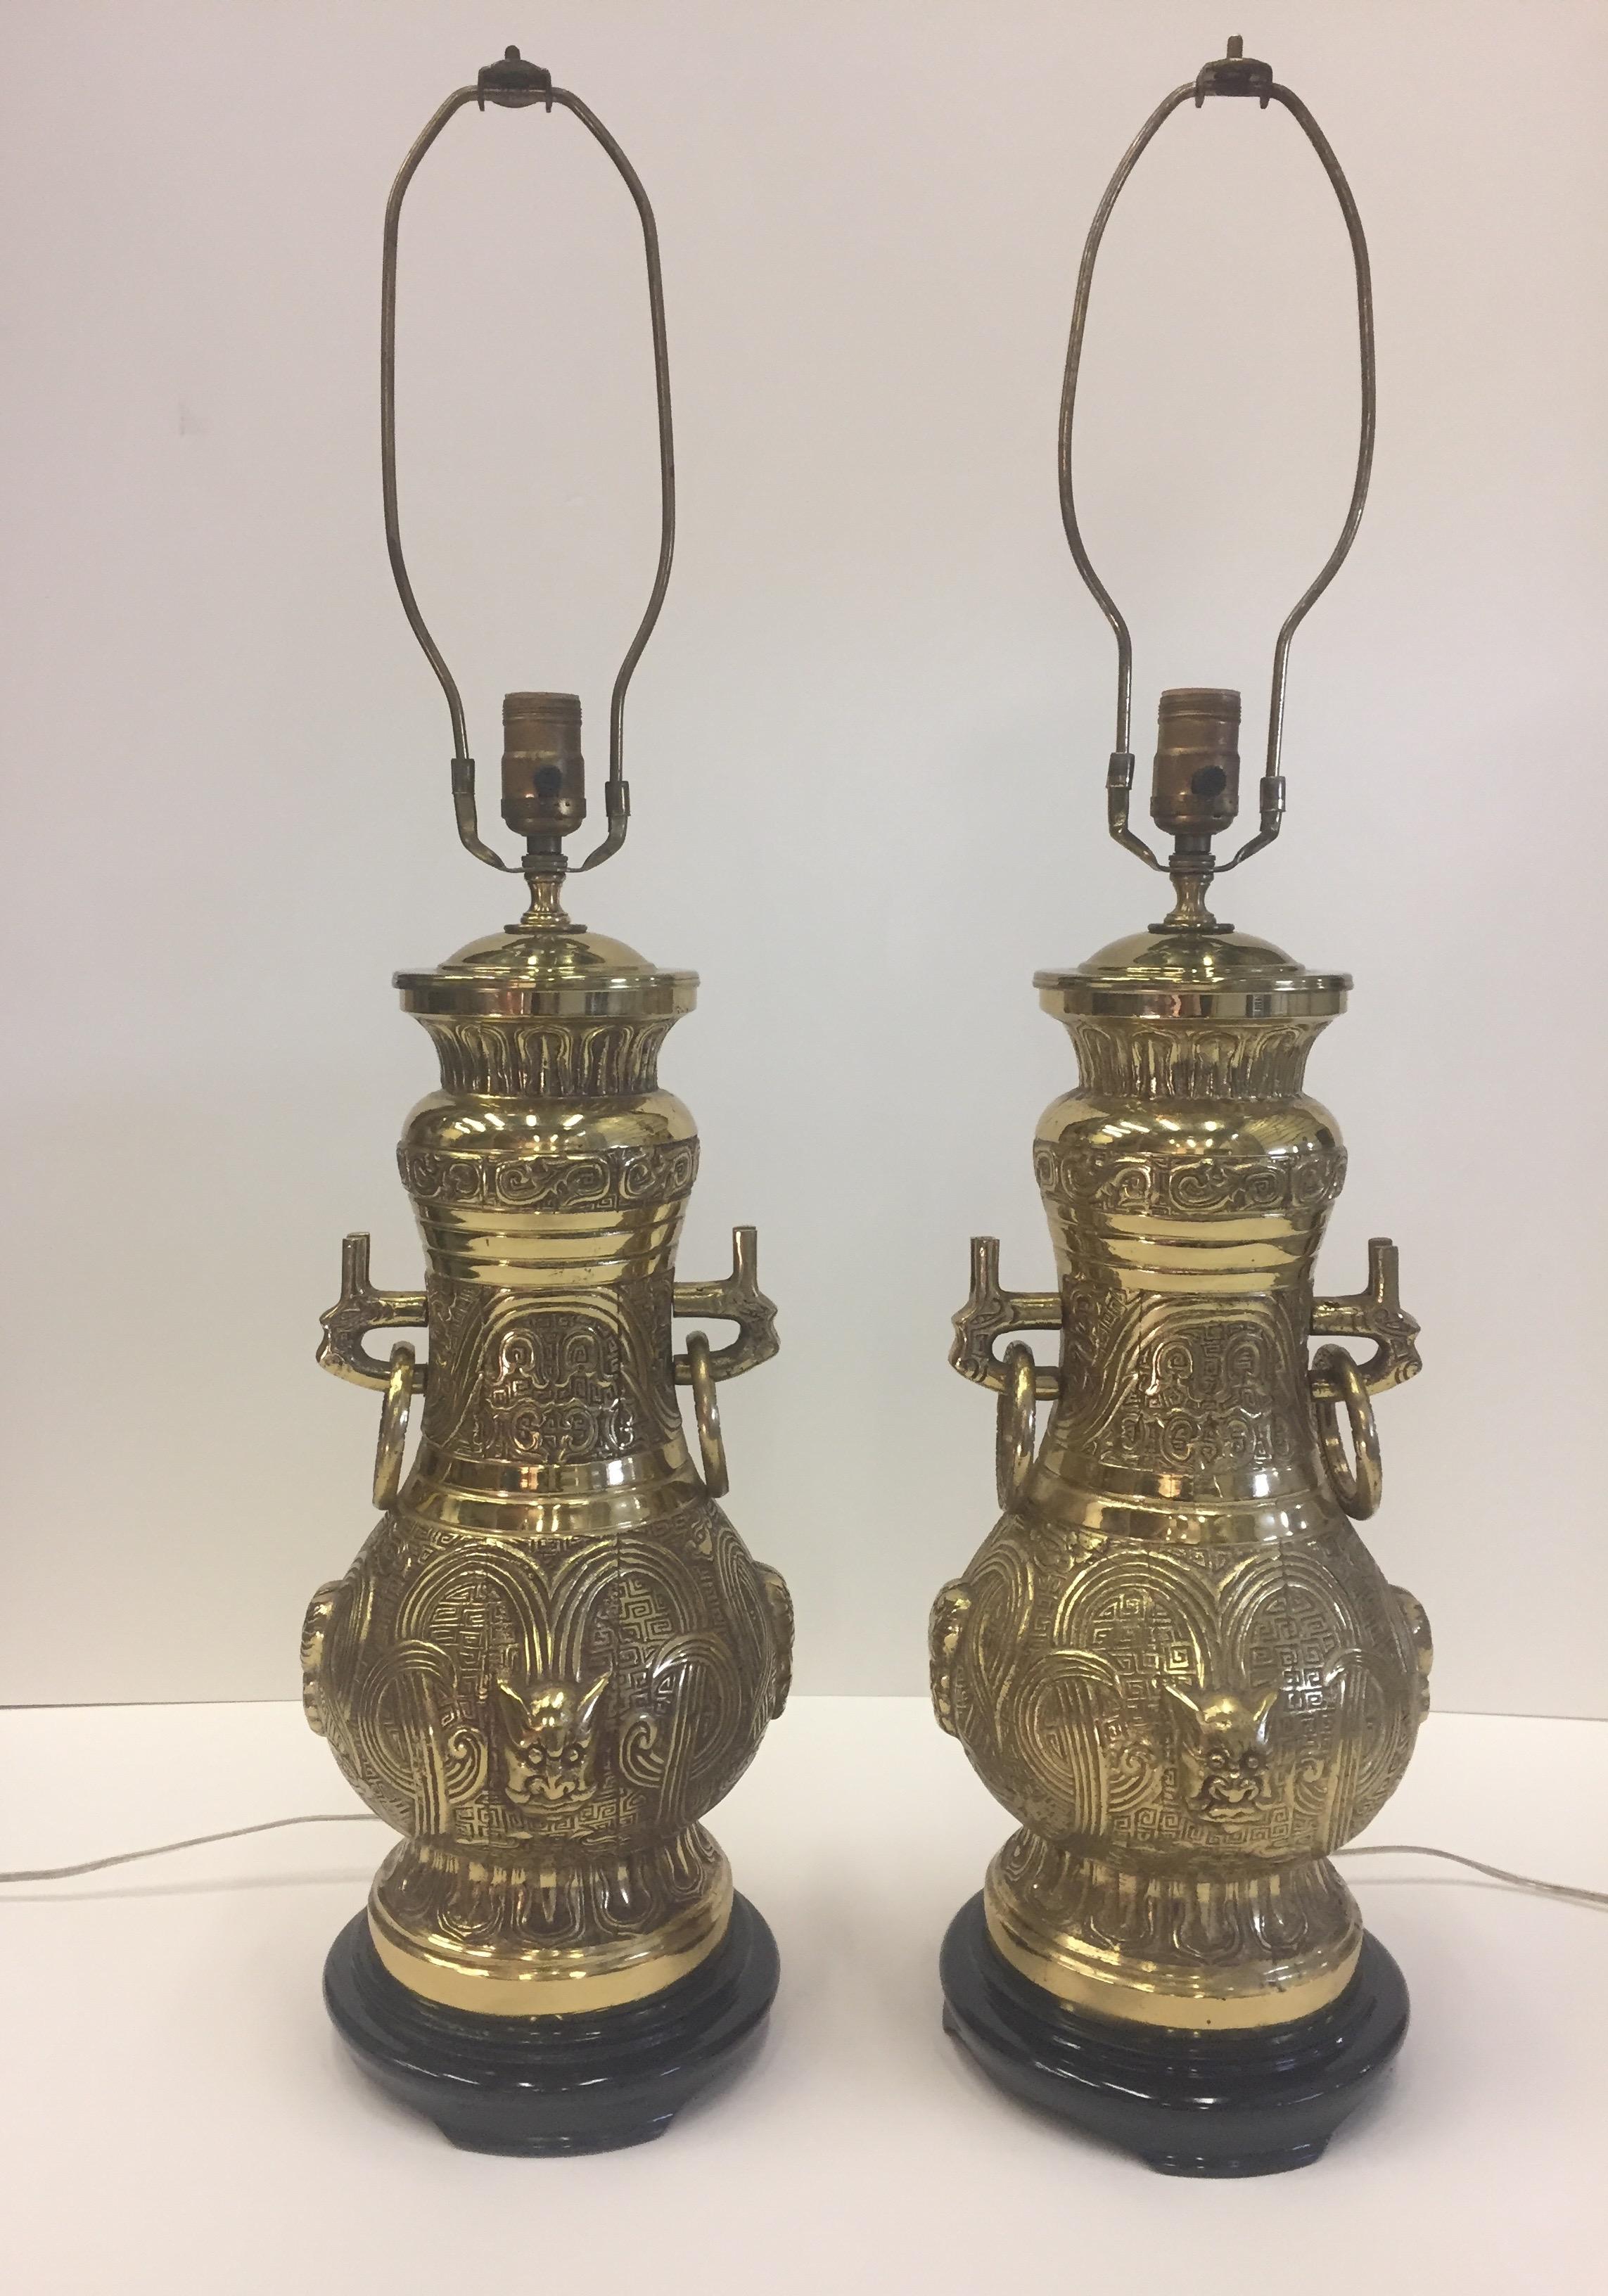 Impressively decorative brass Asian style large lamps having ebonized bases, loose rings on the sides and a glamorous face motif.
Beautiful new black square shades.
3 way bulb socket in each.